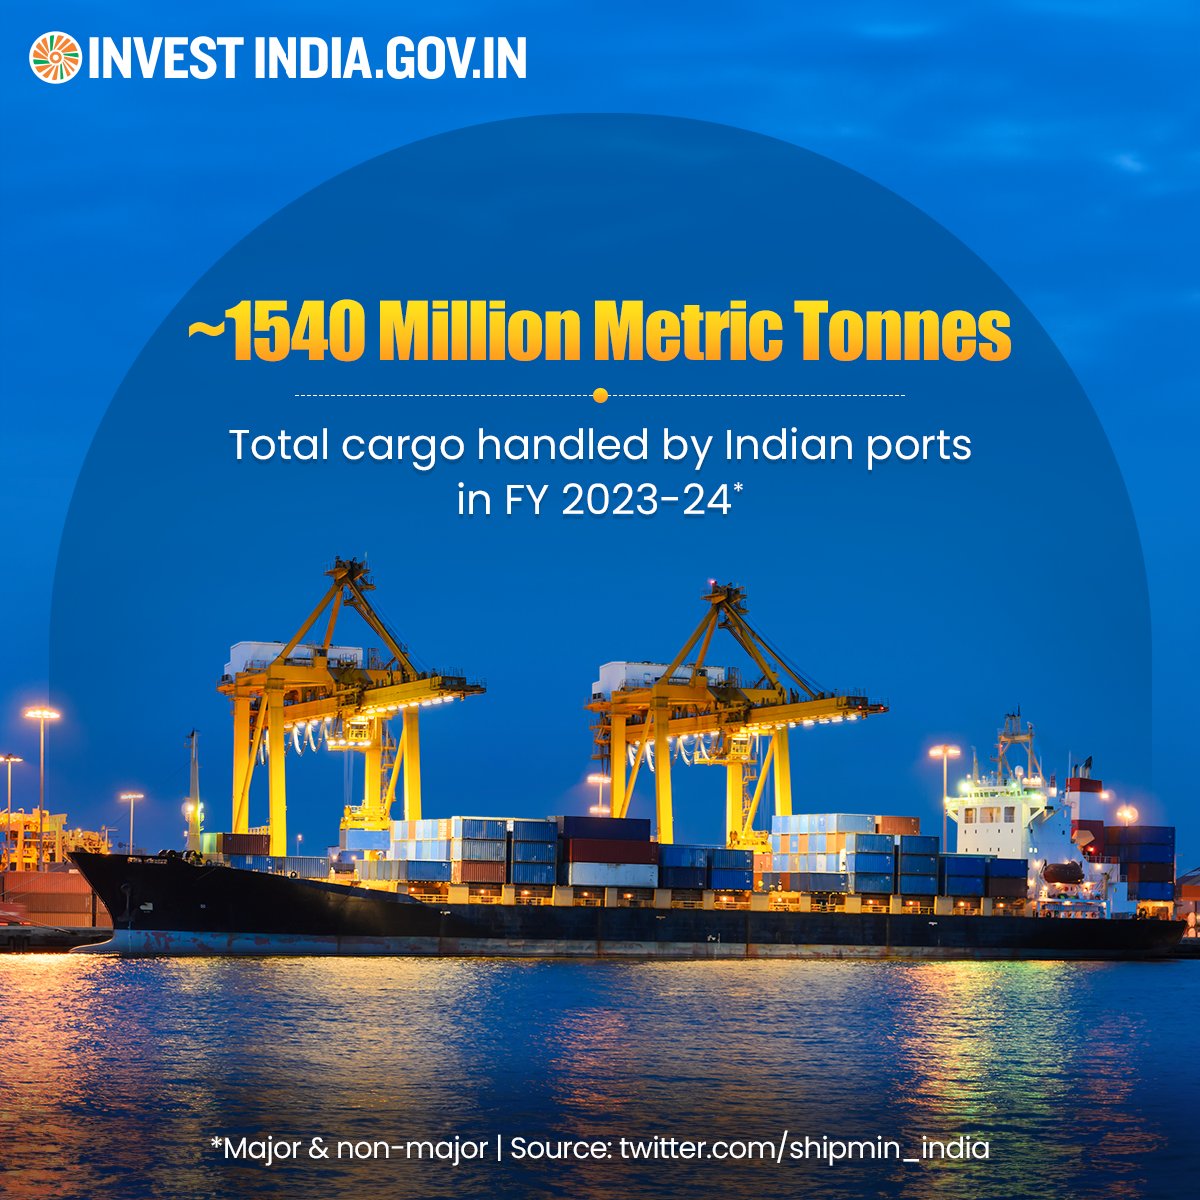 Dock at India's port of growth and expand your trade with world-class #maritime infrastructure, which ranges from massive ports & incentives to expansive ship repair facilities and a skilled workforce.  🌊⚓️

Explore more: bit.ly/II-Ports

#InvestInIndia #CargoHandling